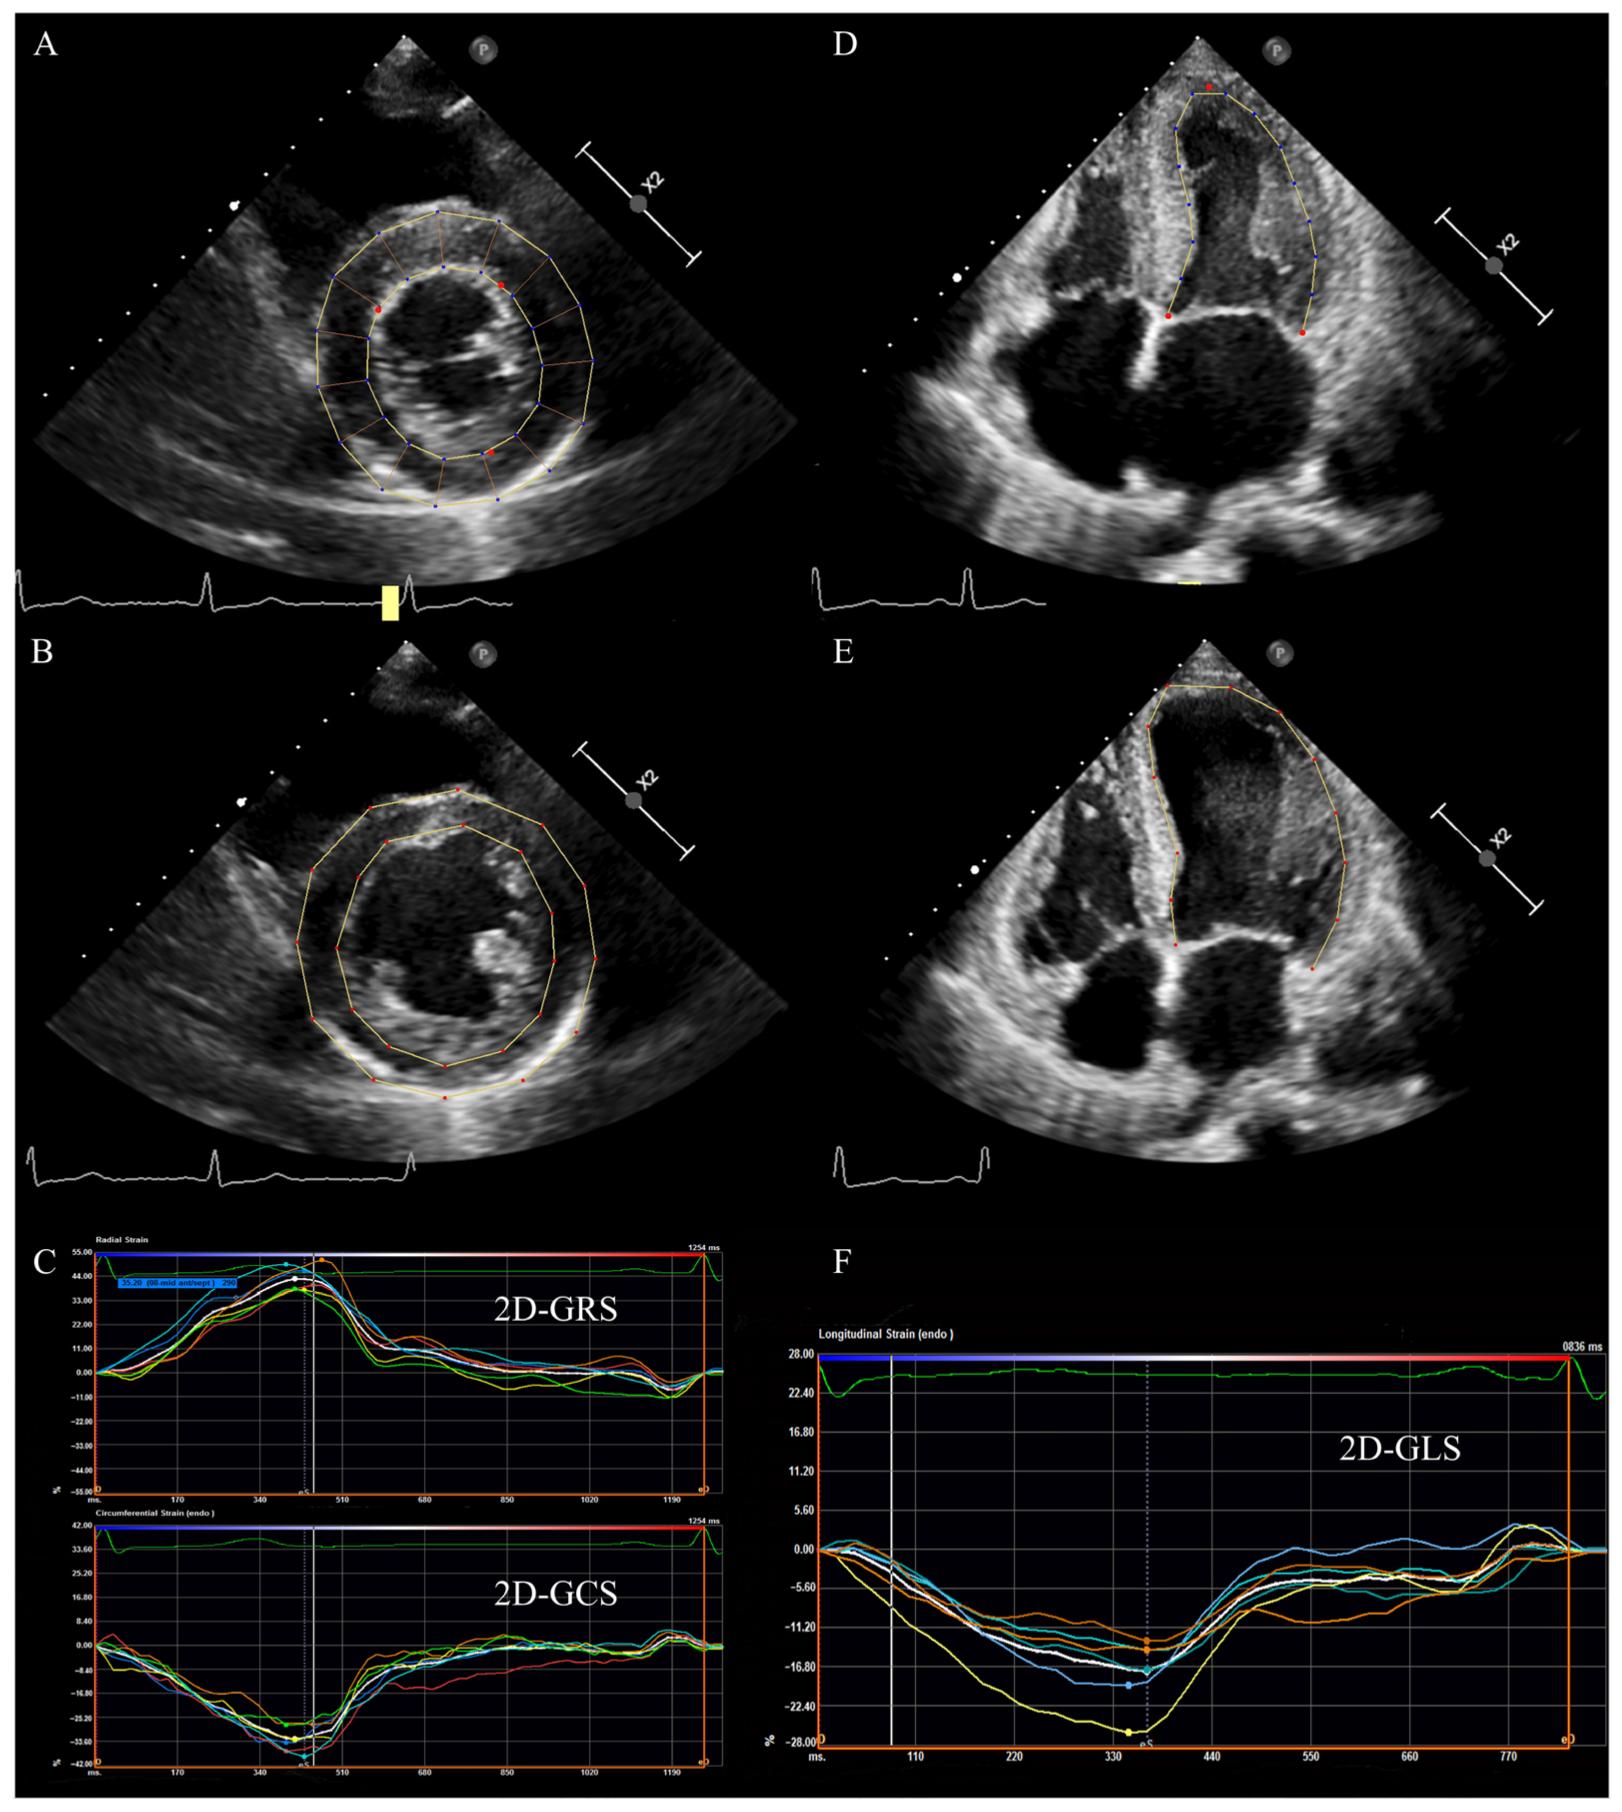 Clinical Applications of Echo Strain Imaging: a Current Appraisal